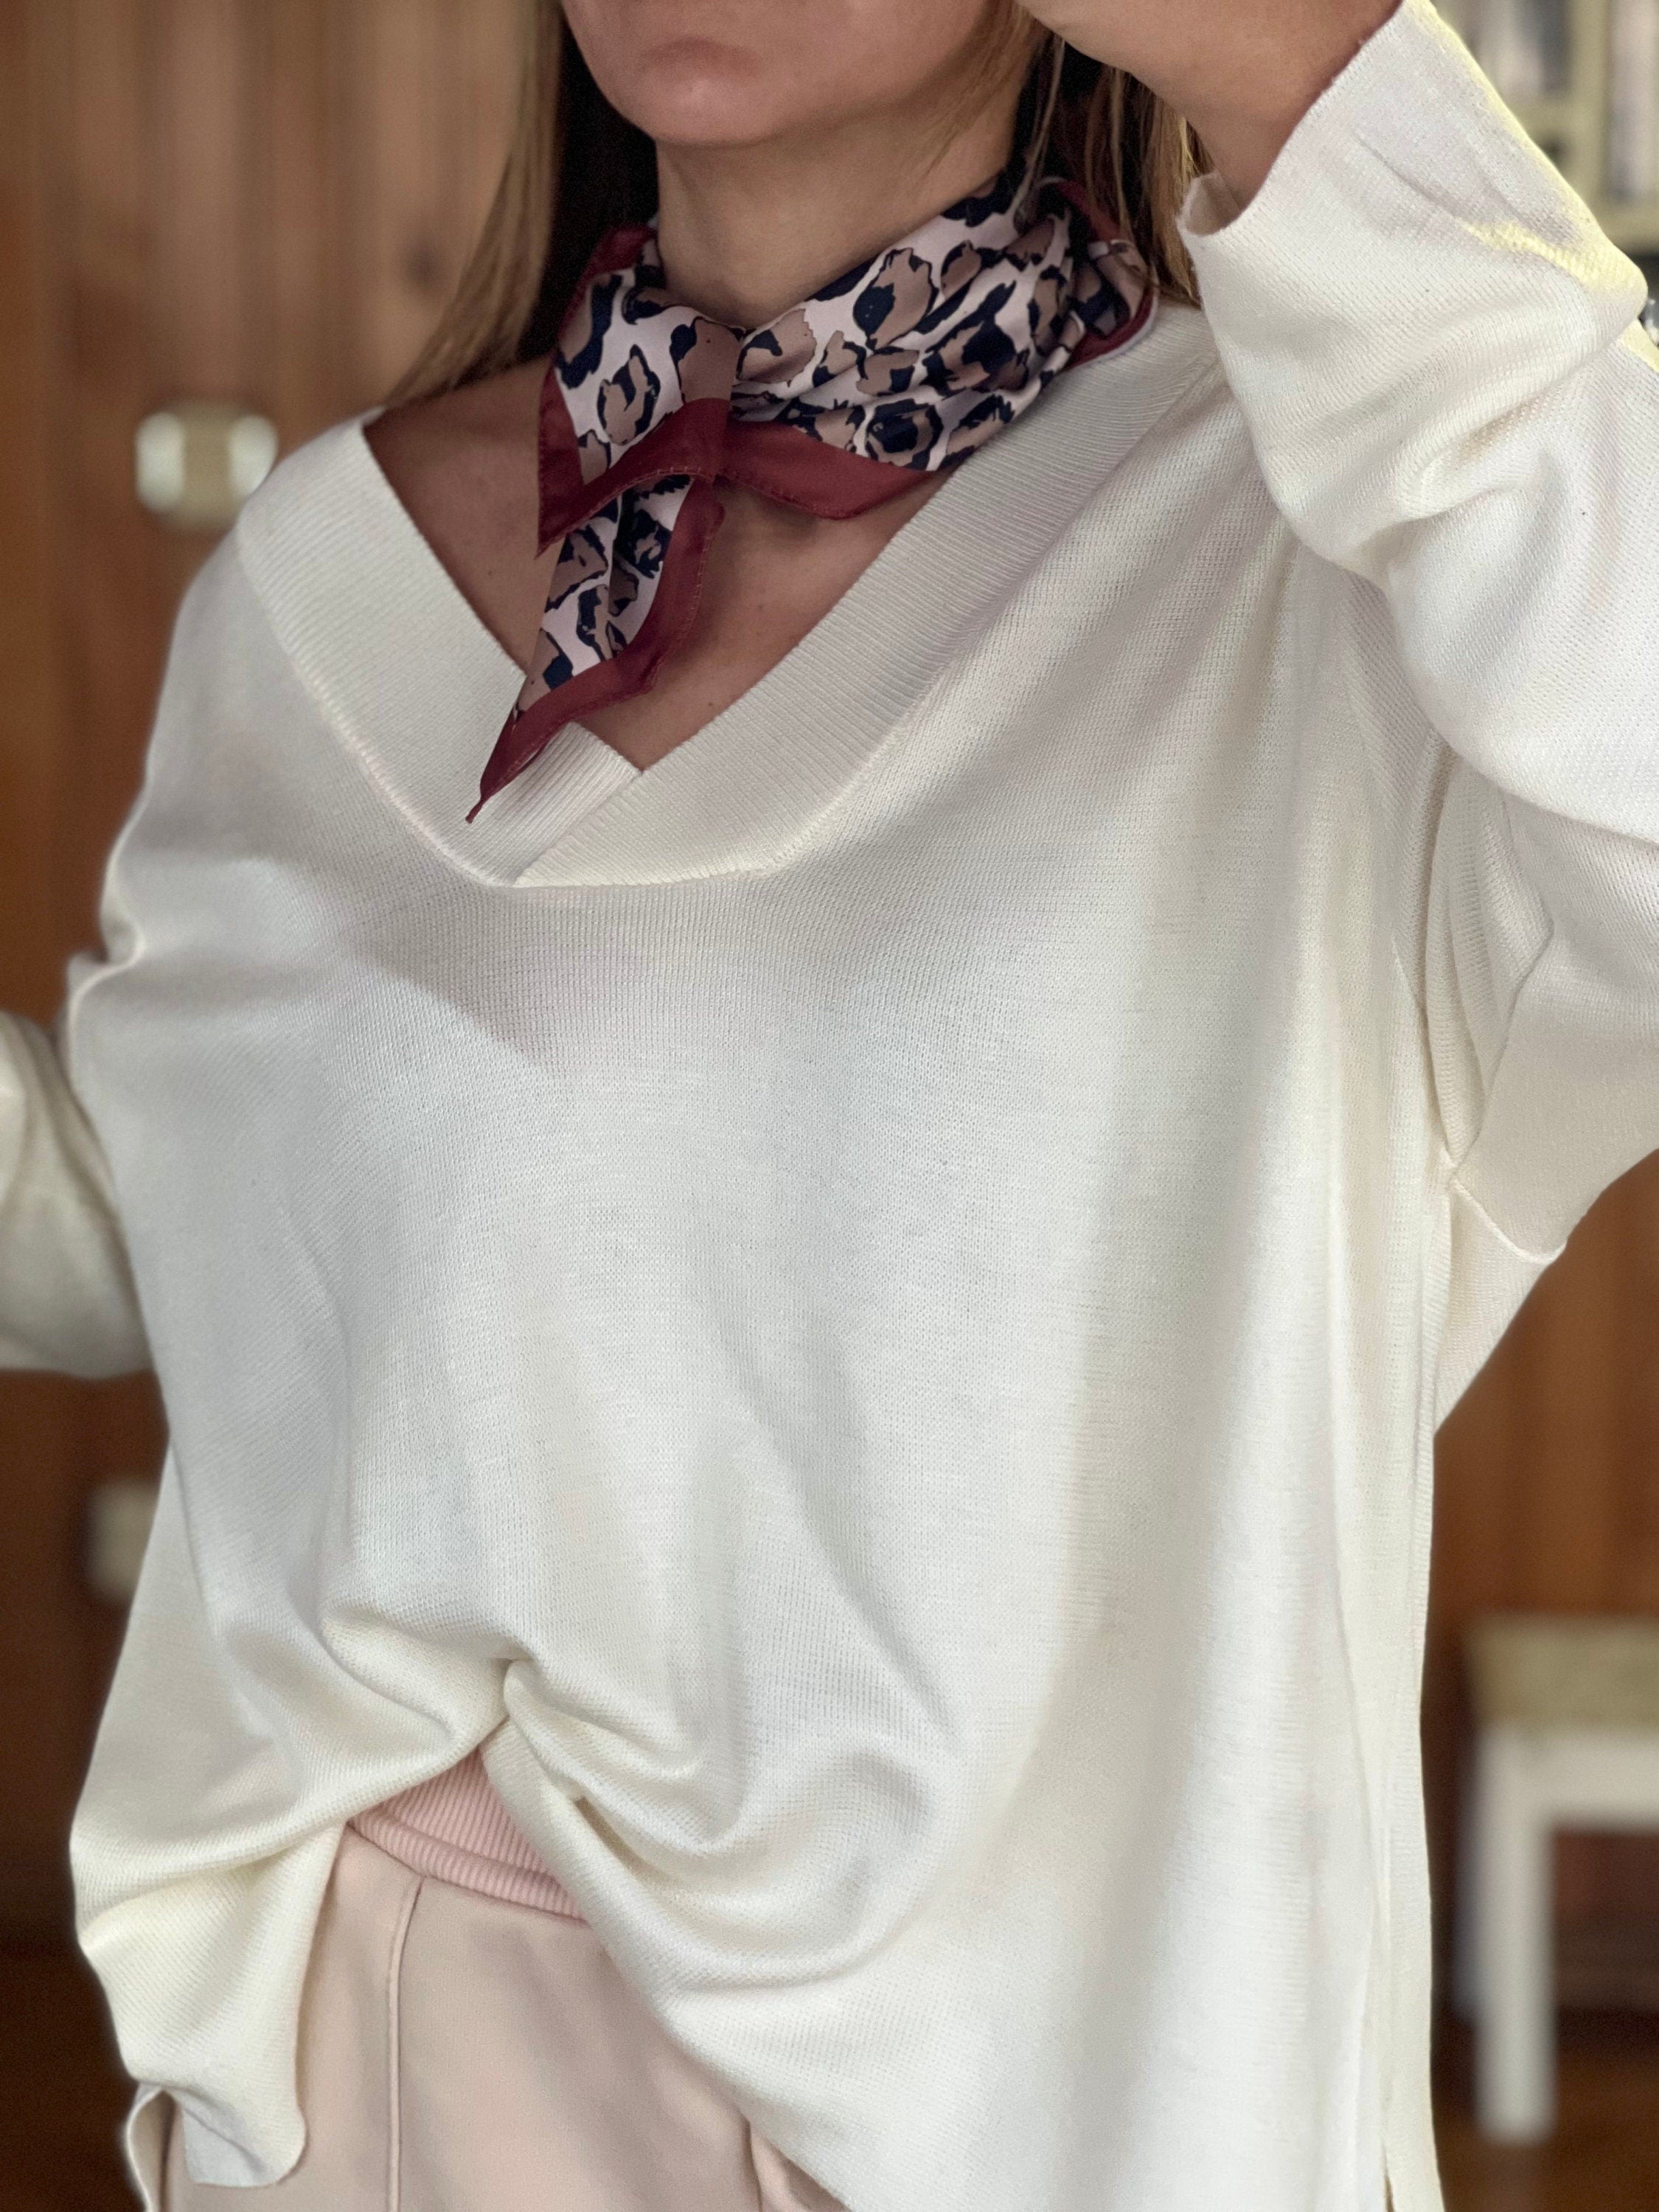 Depending on the size of your scarf, you can create different styles of scarf tops. You can pair this with high waist denim or shorts. Imagine the different outfits you can create with your scarf this summer.